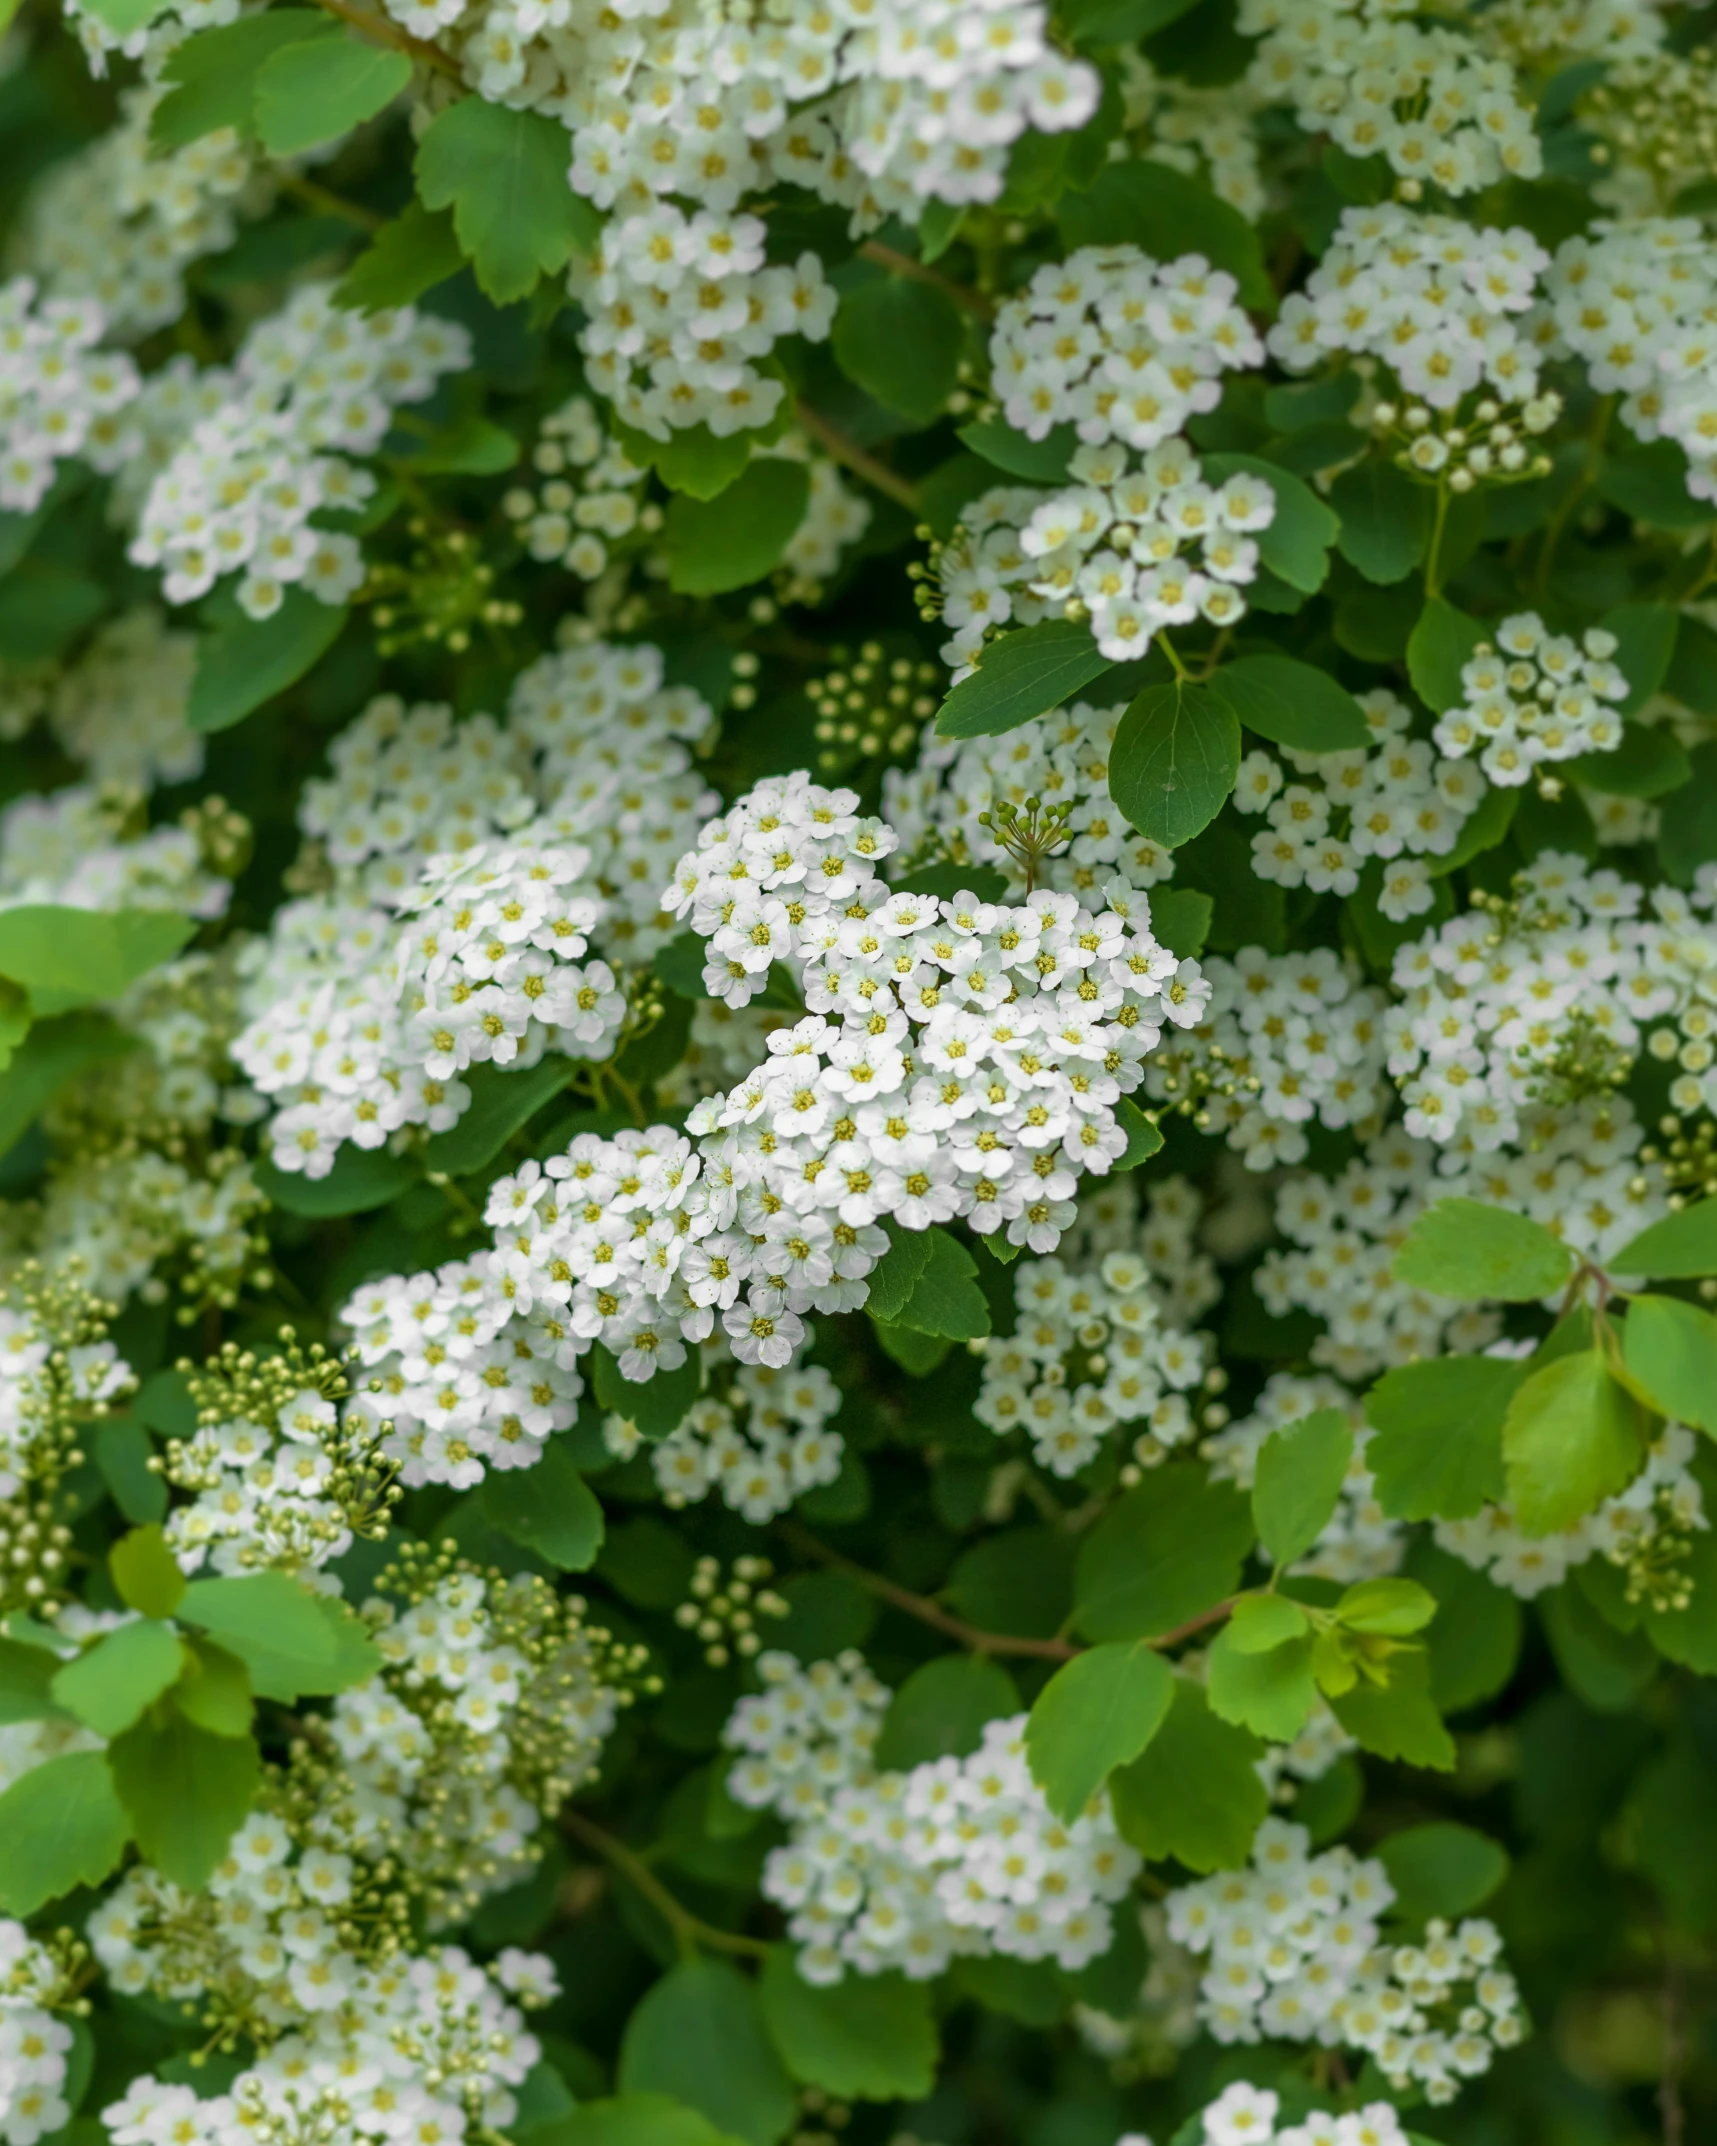 some white flowers and green leaves growing on a tree